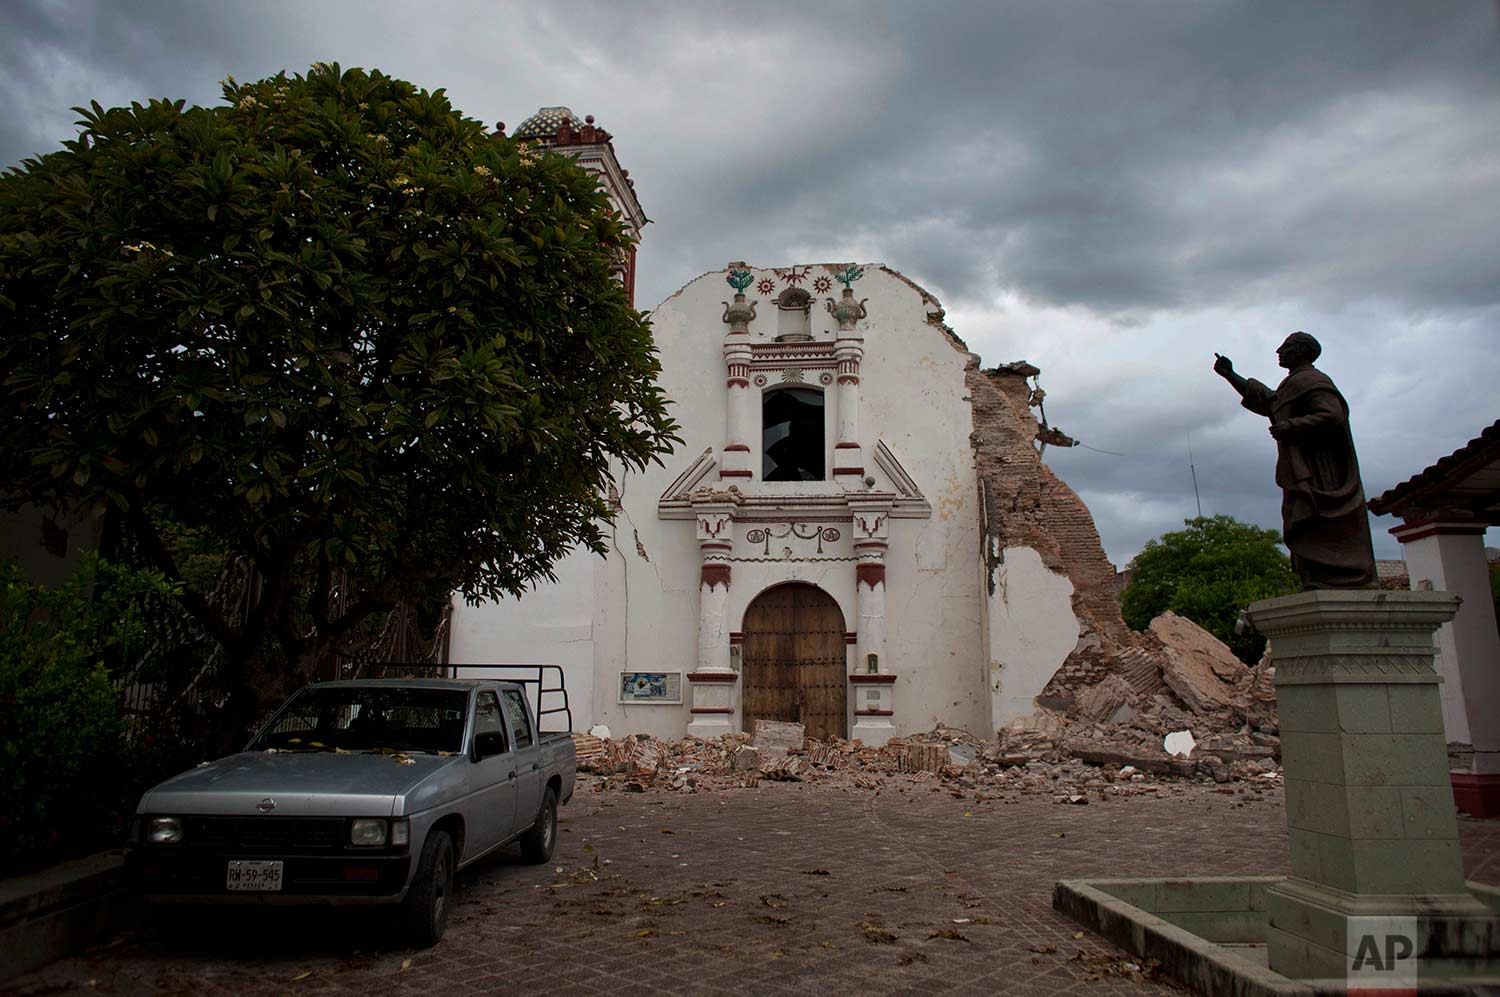  Clouds hover over the damaged San Vicente church on Sunday, Sept. 10, 2017 after an 8.1 magnitude earthquake the previous week in Juchitan, Oaxaca state, Mexico. In Juchitan, a third of the homes are reported uninhabitable and repeated aftershocks h